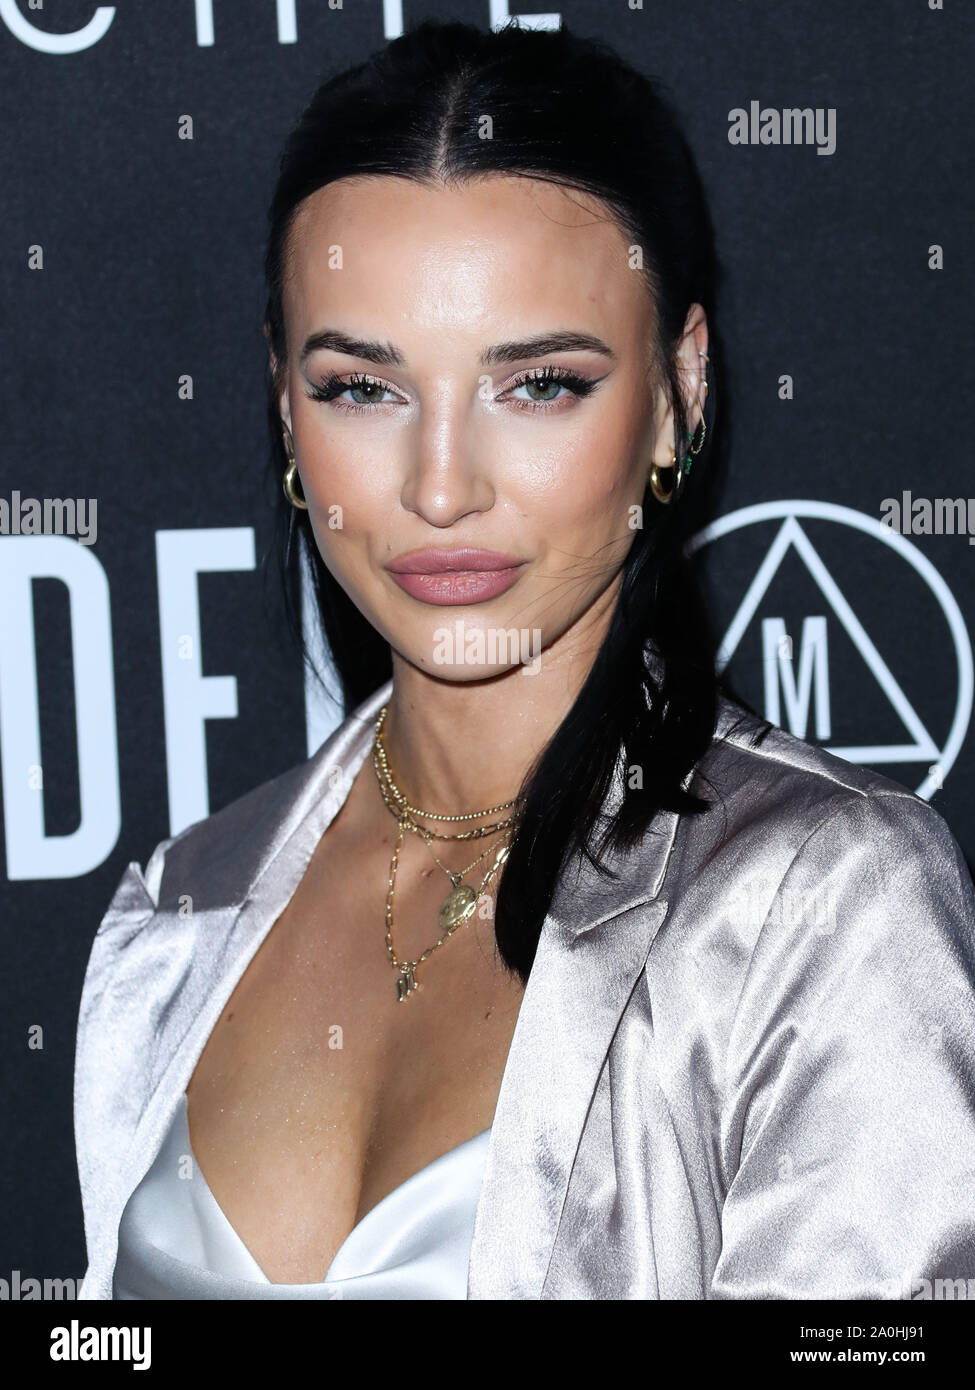 WEST HOLLYWOOD, LOS ANGELES, CALIFORNIA, USA - SEPTEMBER 18: Genelle Seldon arrives at the Sofia Richie x Missguided Launch Party held at Bootsy Bellows on September 18, 2019 in West Hollywood, Los Angeles, California, United States. (Photo by Xavier Collin/Image Press Agency) Stock Photo